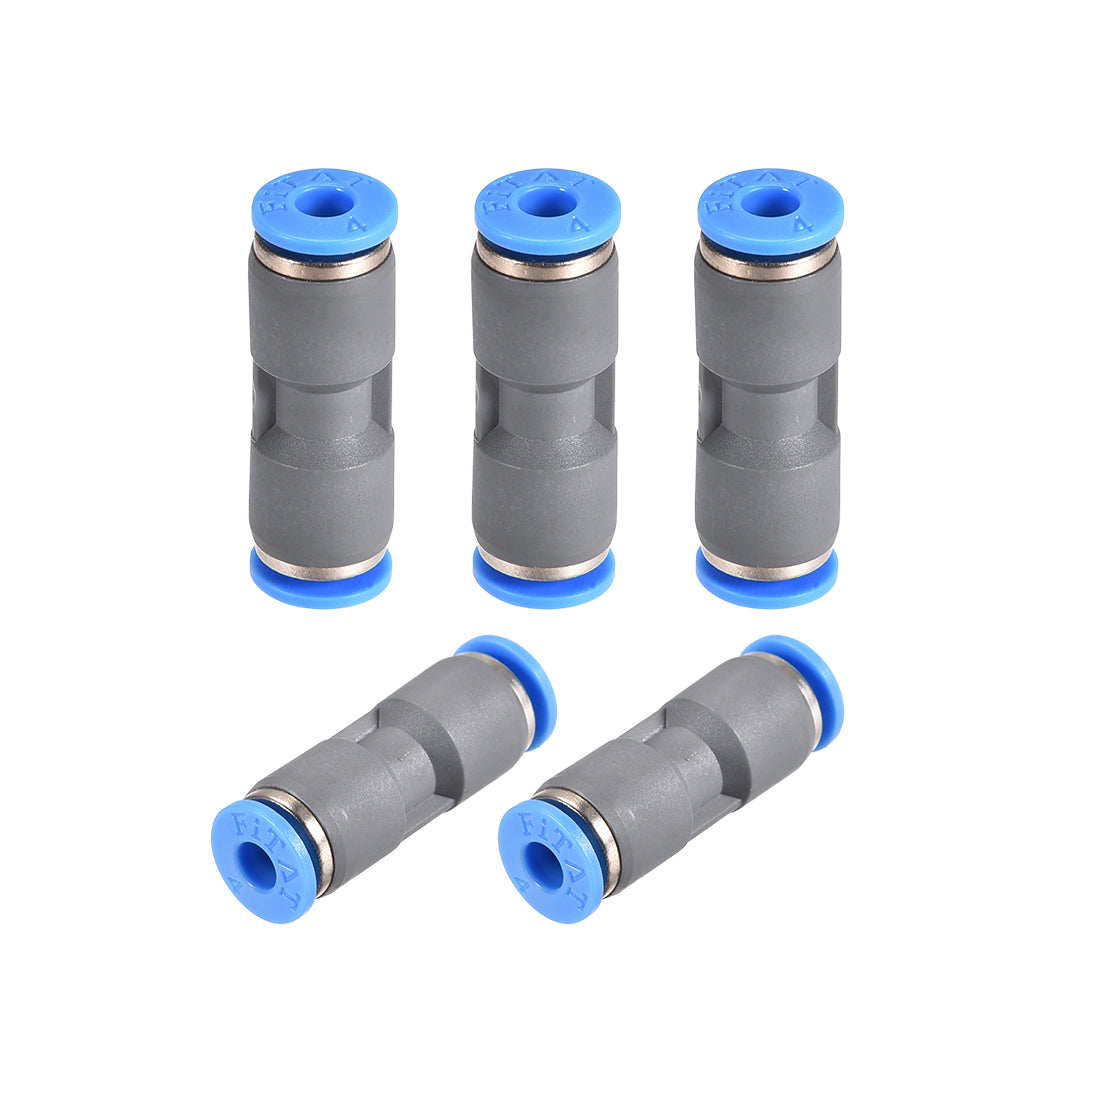 uxcell Uxcell Straight Push Connectors 4mm Quick Release Pneumatic Connector Plastic Union Pipe Tube Fitting Grey 5Pcs